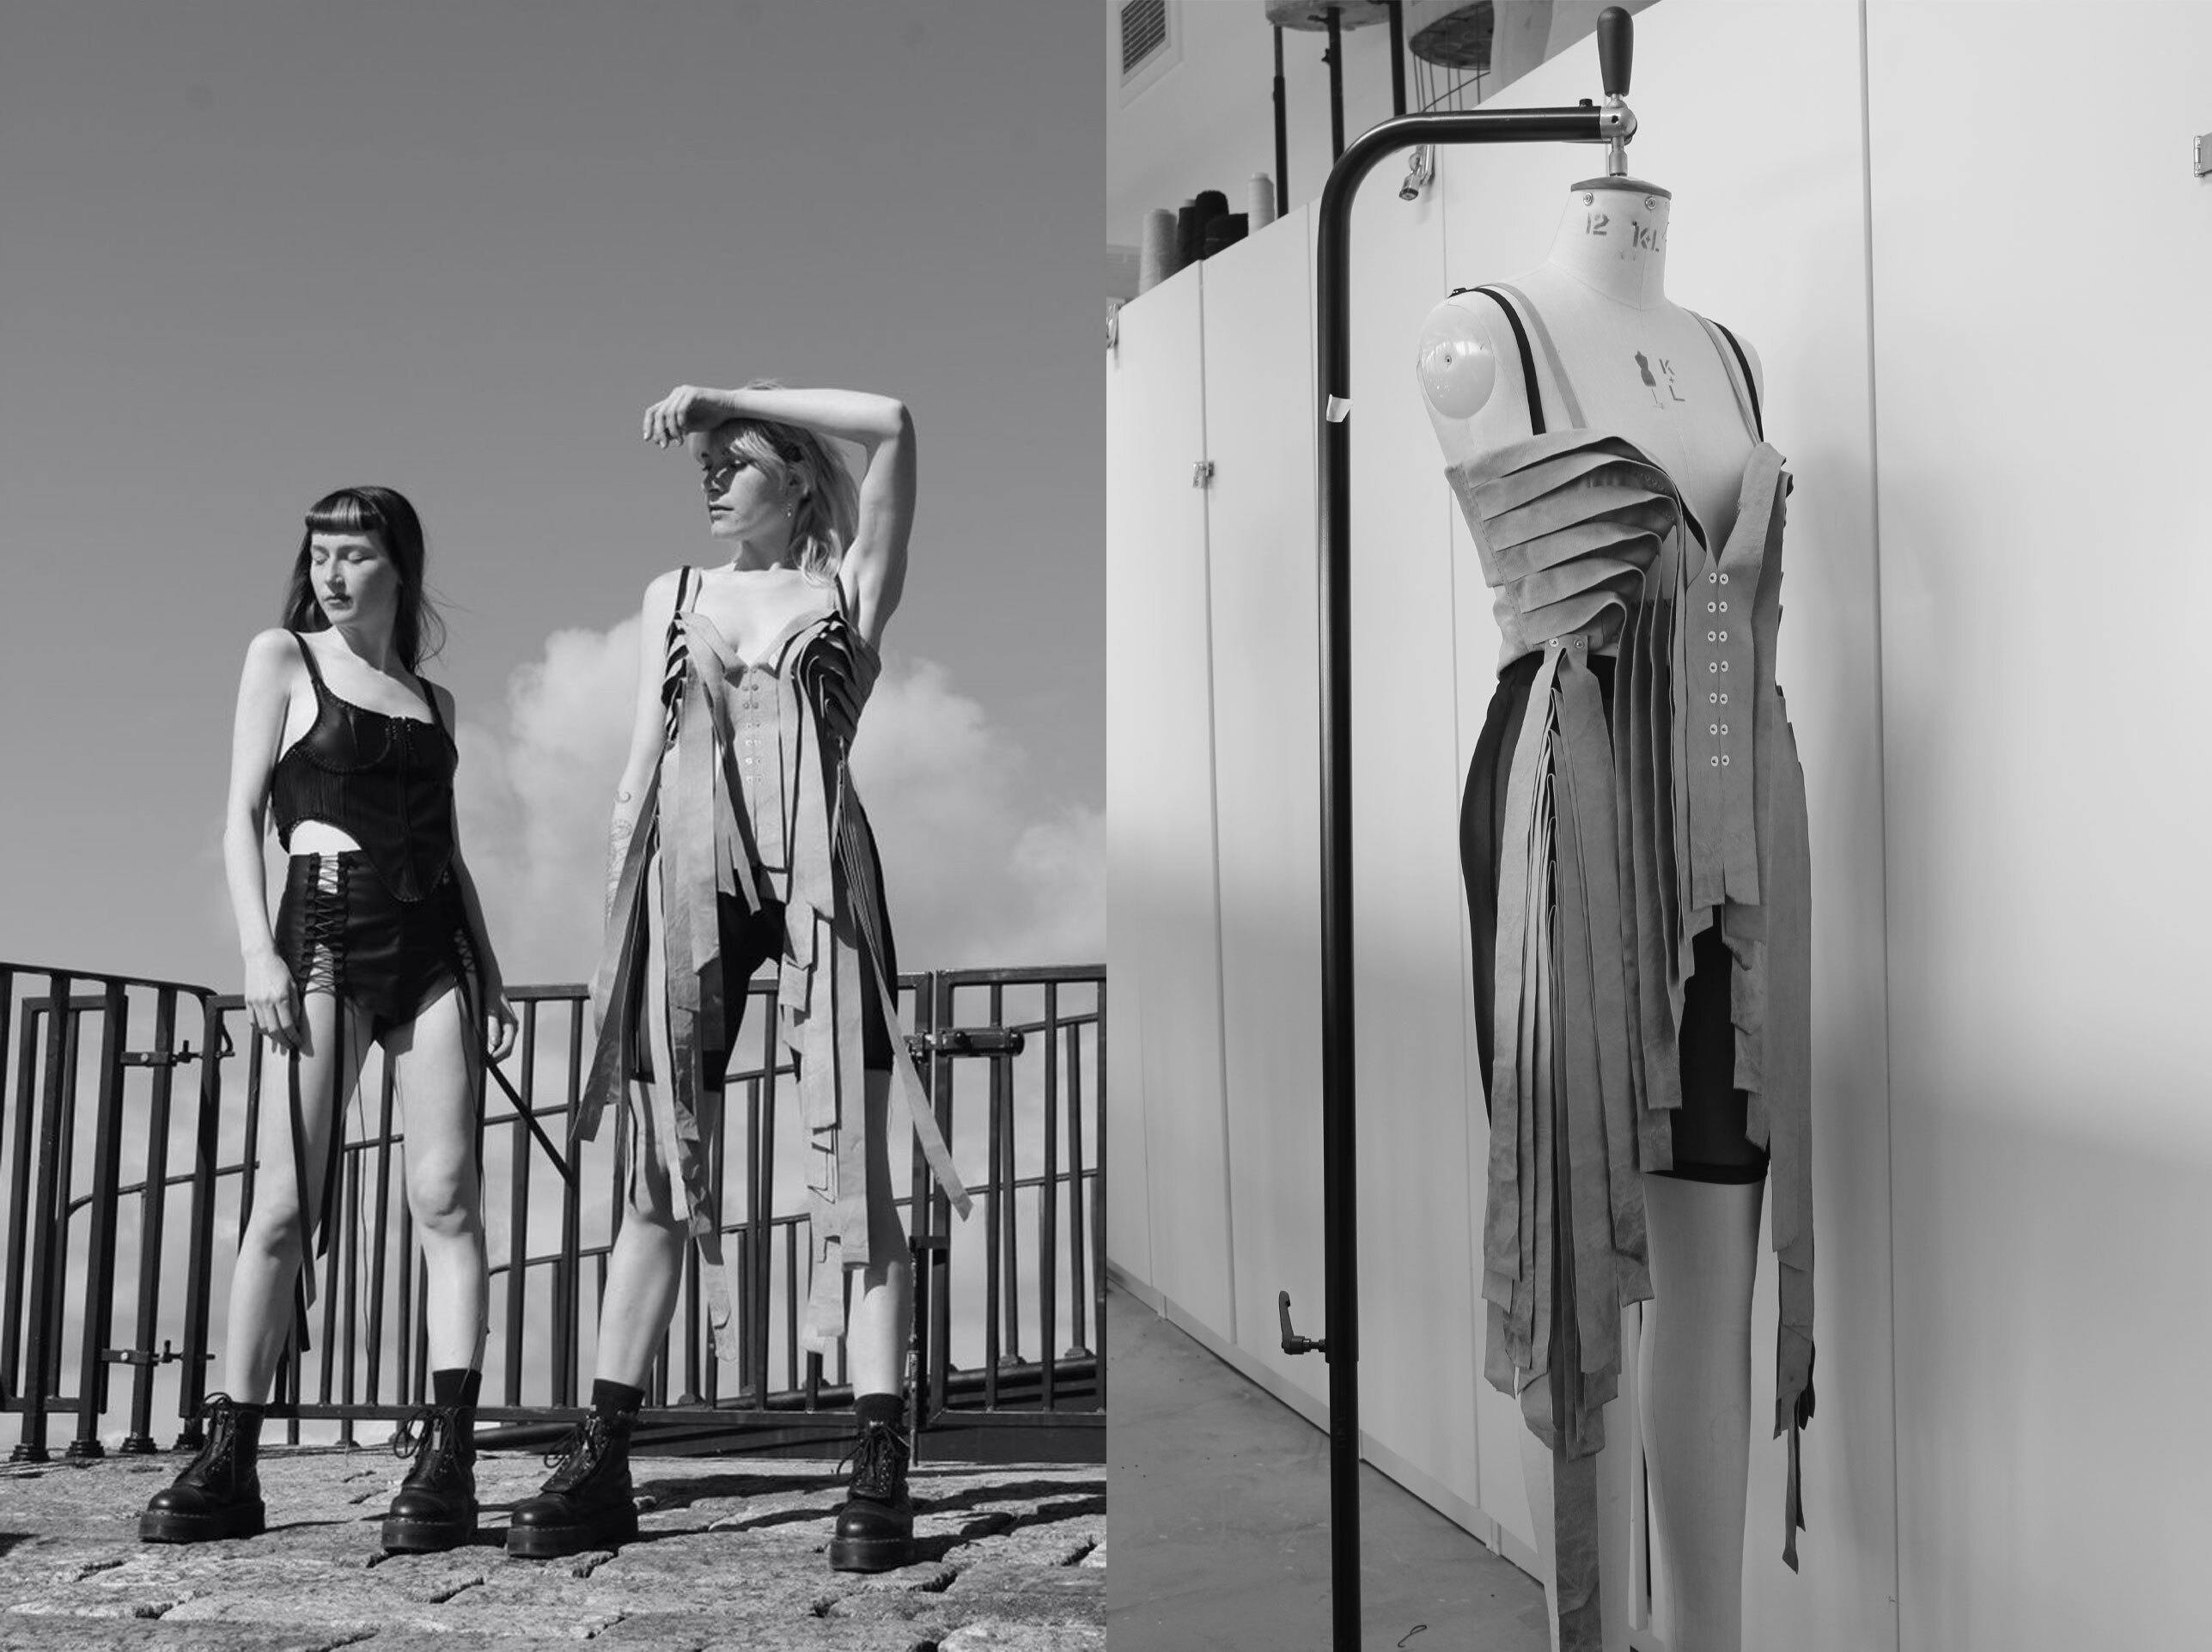 Image is a composition of black and white images, on the left there are two women stood in Phoebe's dresses which are black and grey with textural fabric elements, on the right is Phoebe's grey dress, with textured fabric, hanging on a mannequin